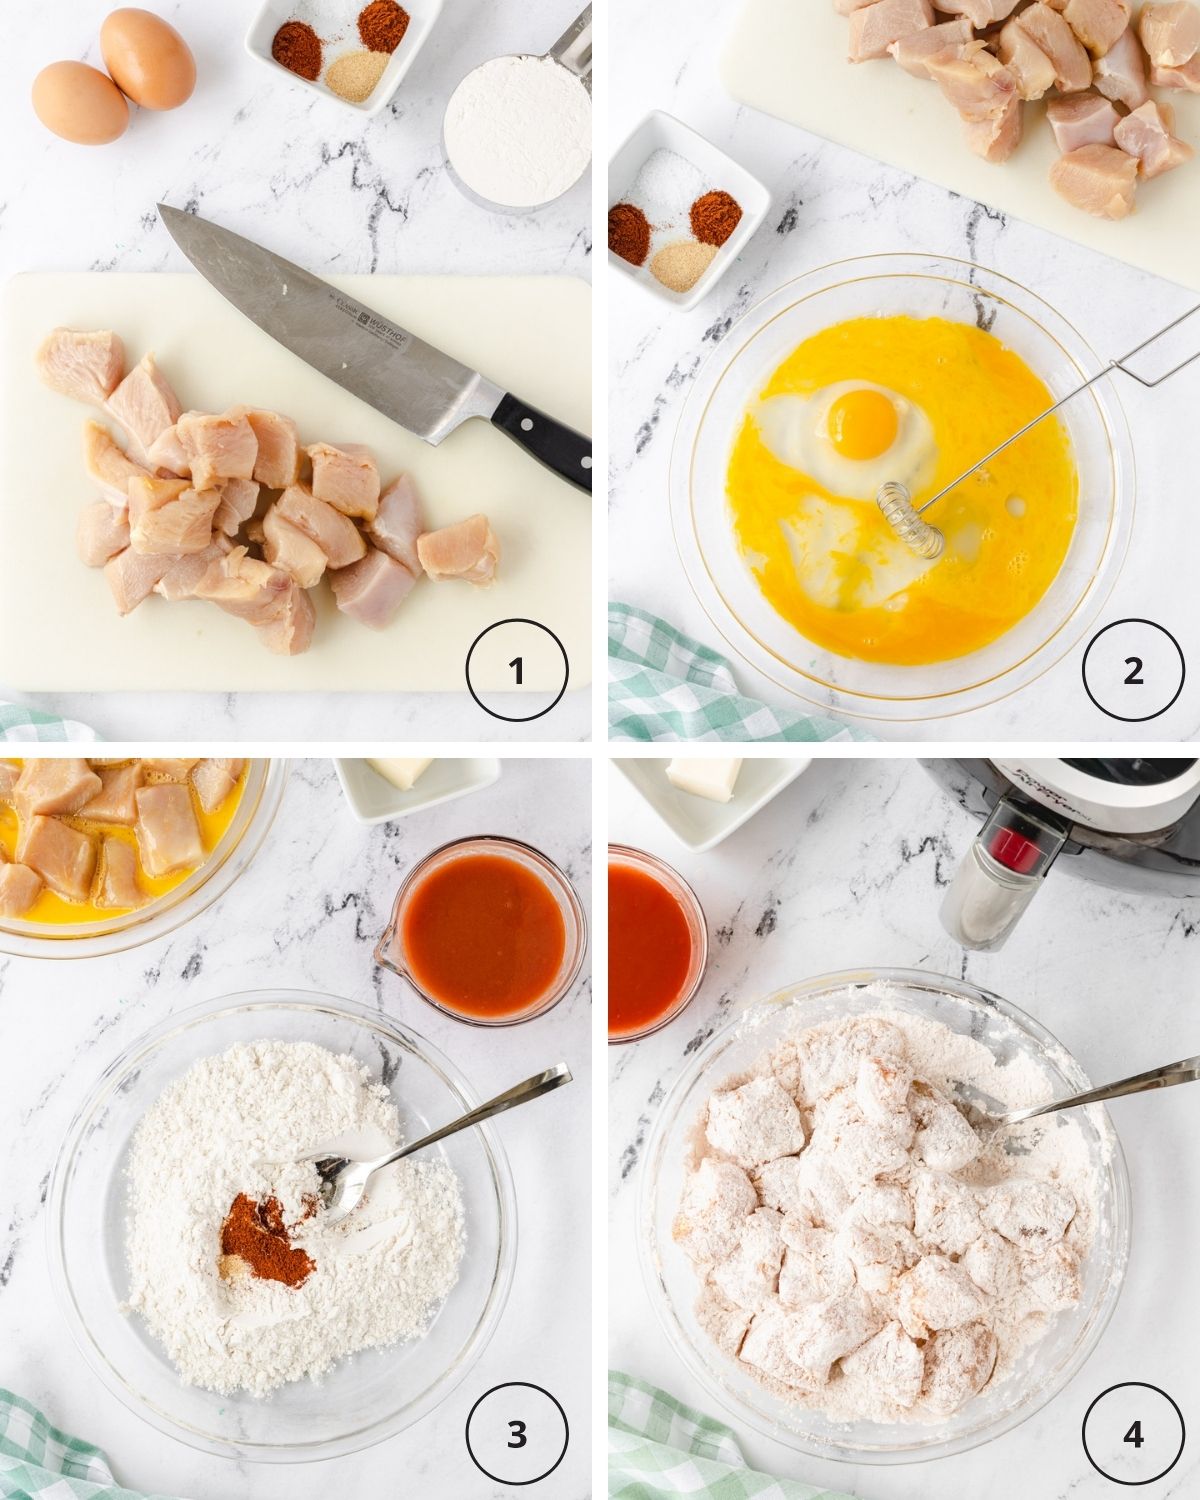 Collage of process shots to make the wings: 1) diced chicken, 2) shallow pan with 2 eggs in it, 3) dry ingredients in a shallow pan, 4) diced chicken coated with flour mixture.